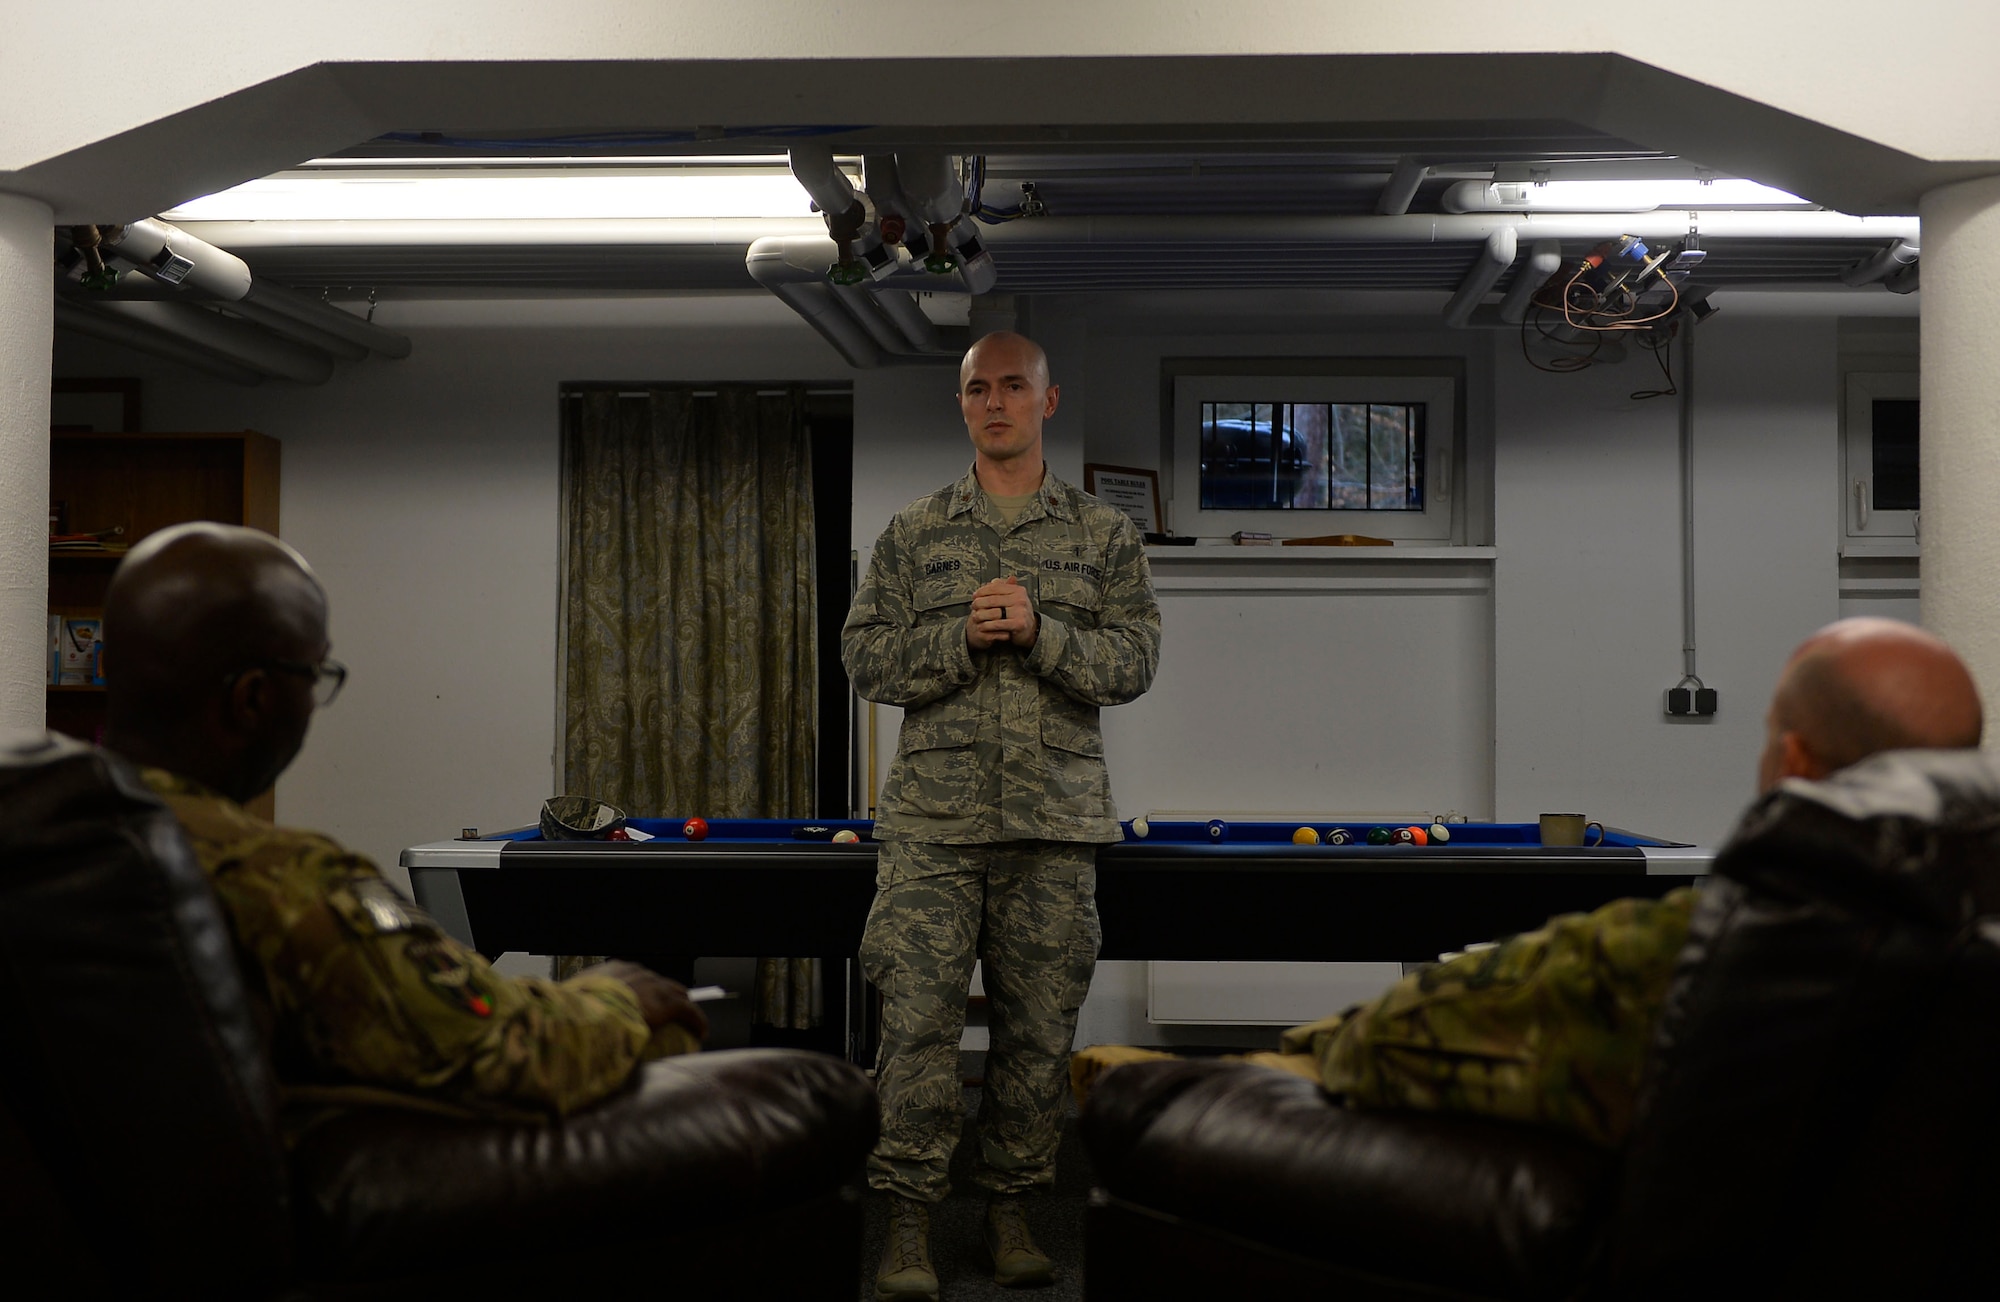 Maj. Corey Carnes, Deployment Transition Center director, conducts a welcome brief for redeploying Airmen on Ramstein Air Base, Germany, Feb. 2, 2017. The DTC takes redeployers through a four-day re-immersion course which aims to help them ease back into non-deployed life. (U.S. Air Force photo by Airman 1st Class Joshua Magbanua)

